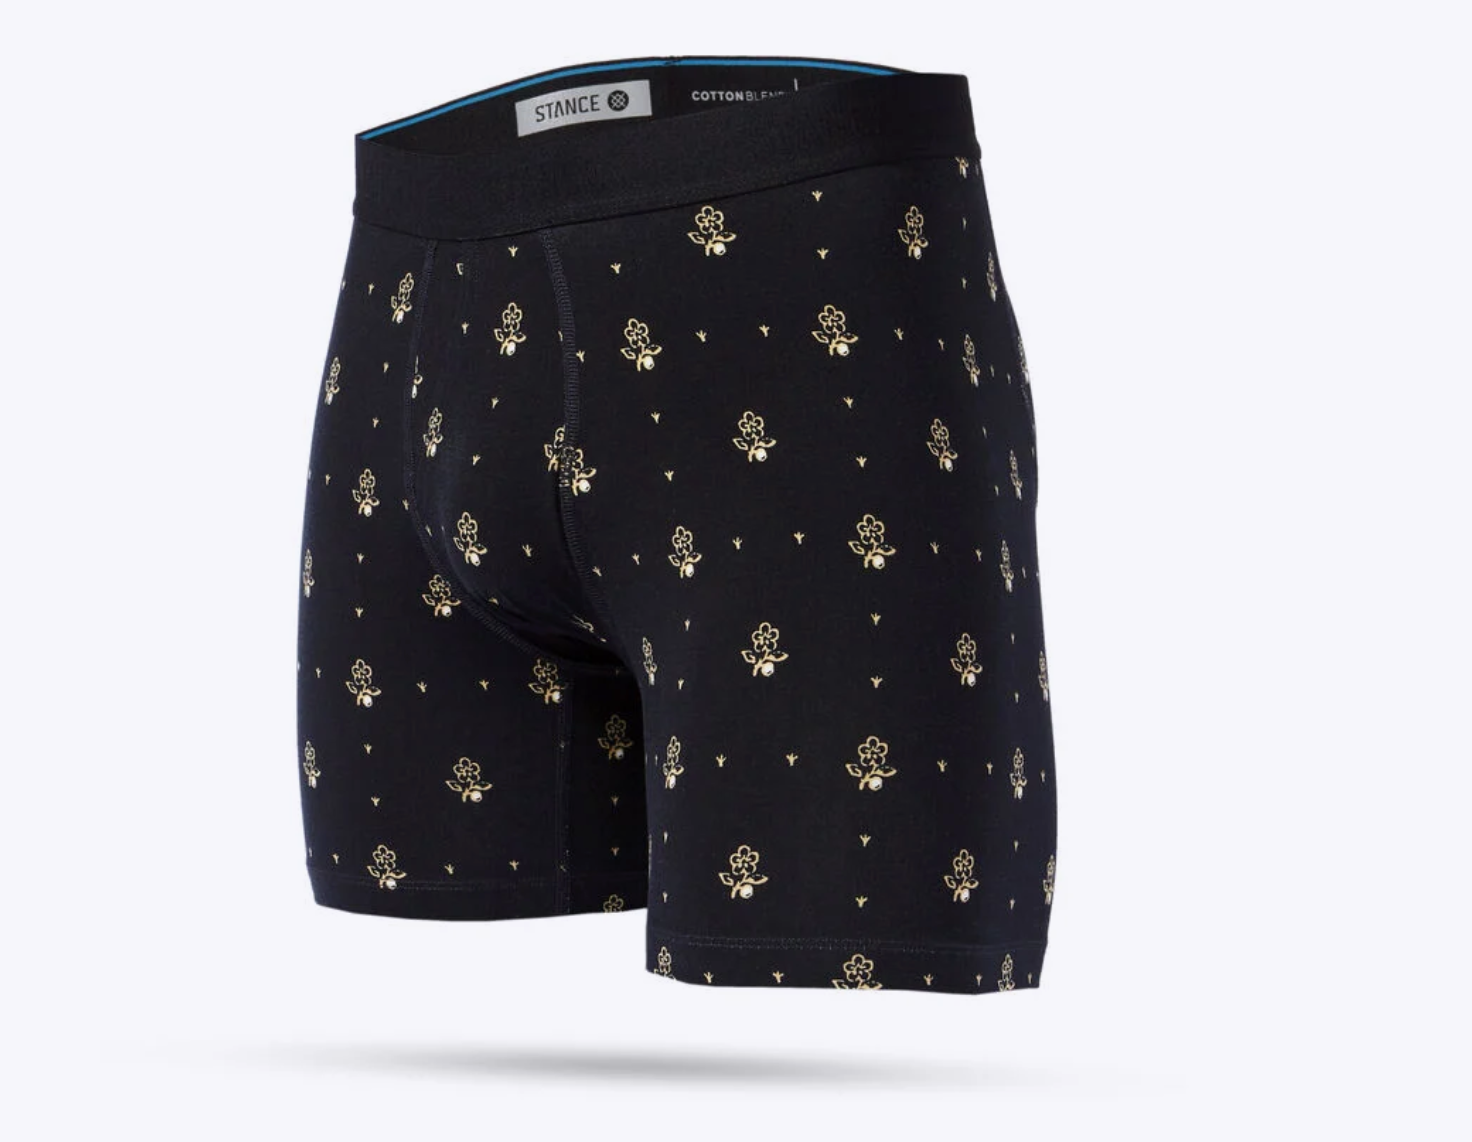 STANCE-Banister Cotton Boxer Brief